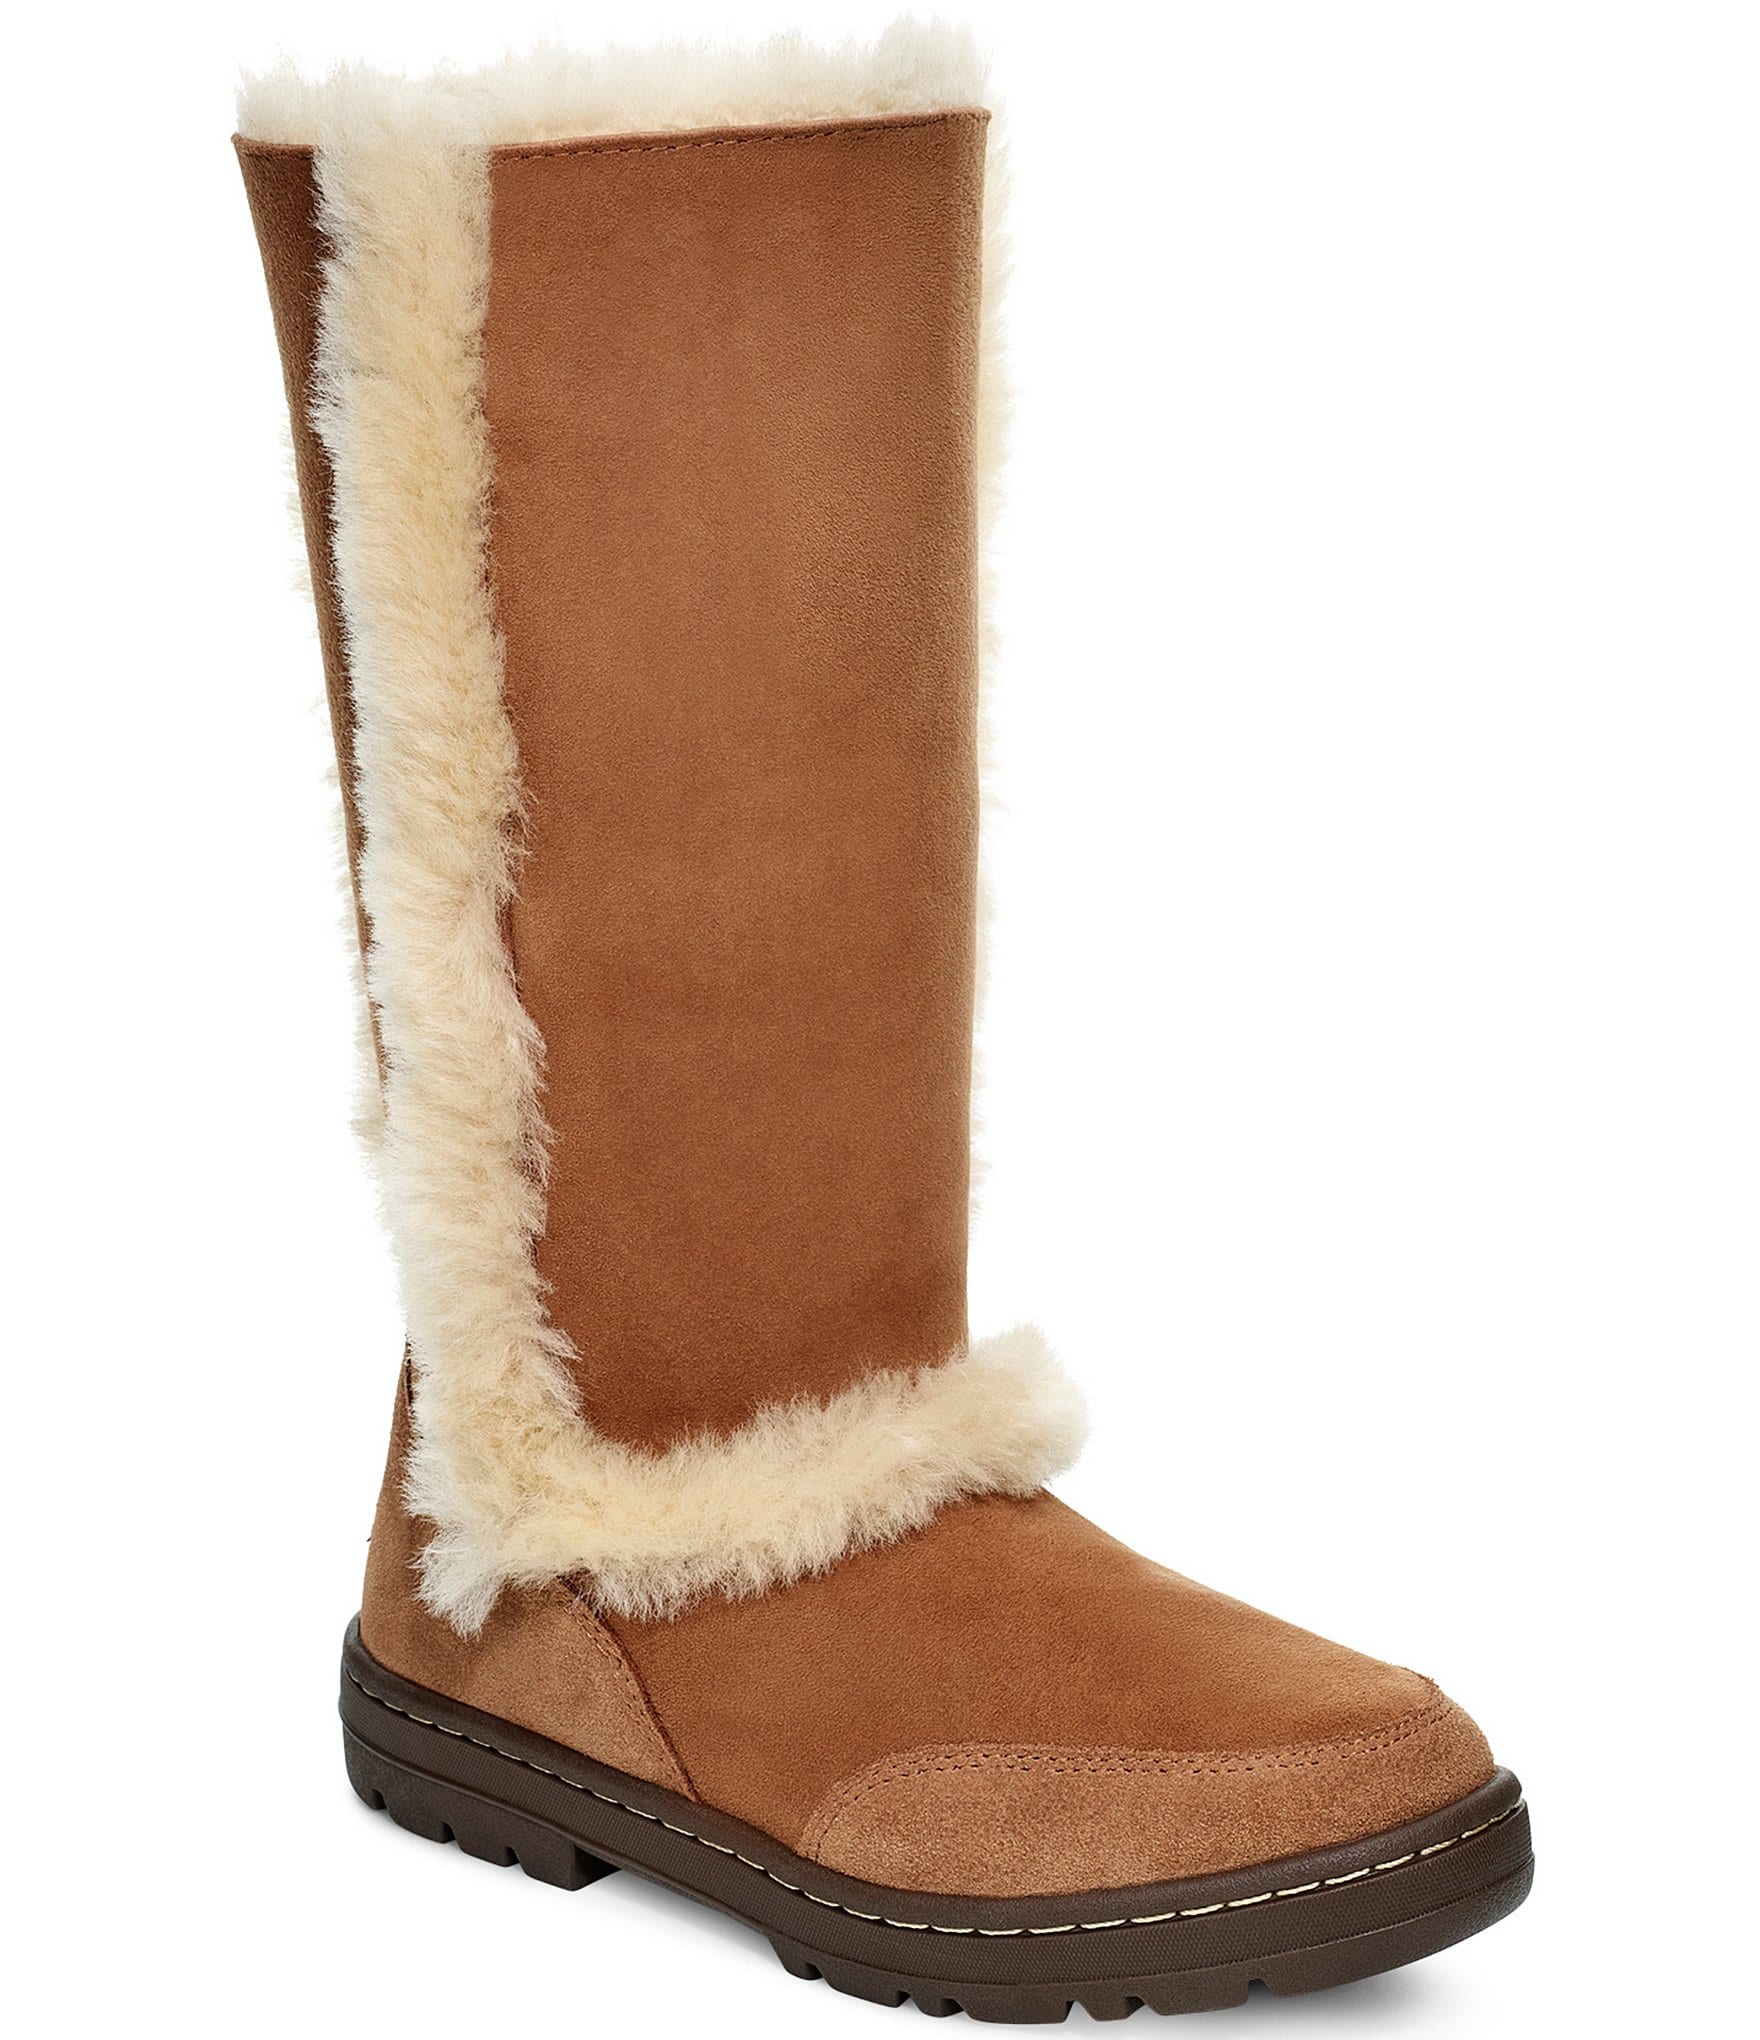 long uggs with fur